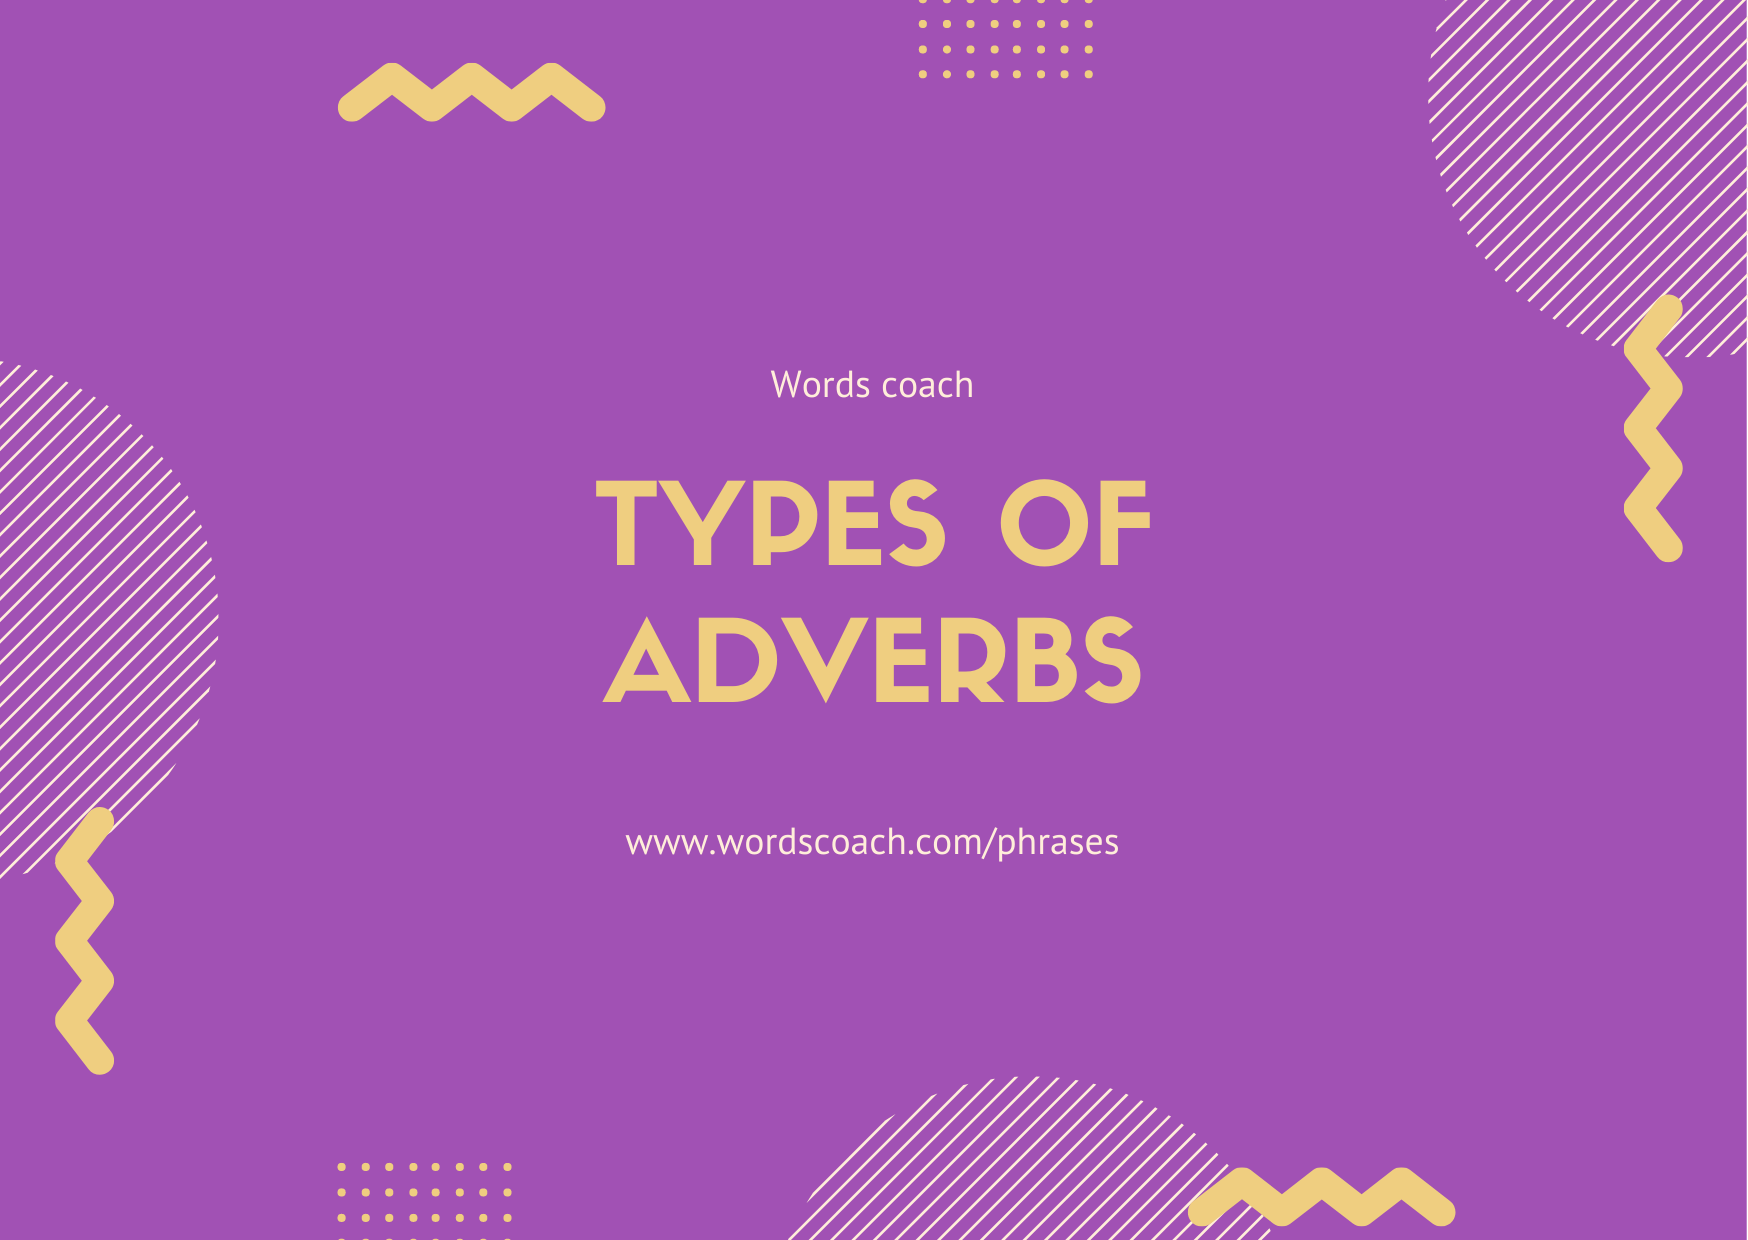 Types of adverbs